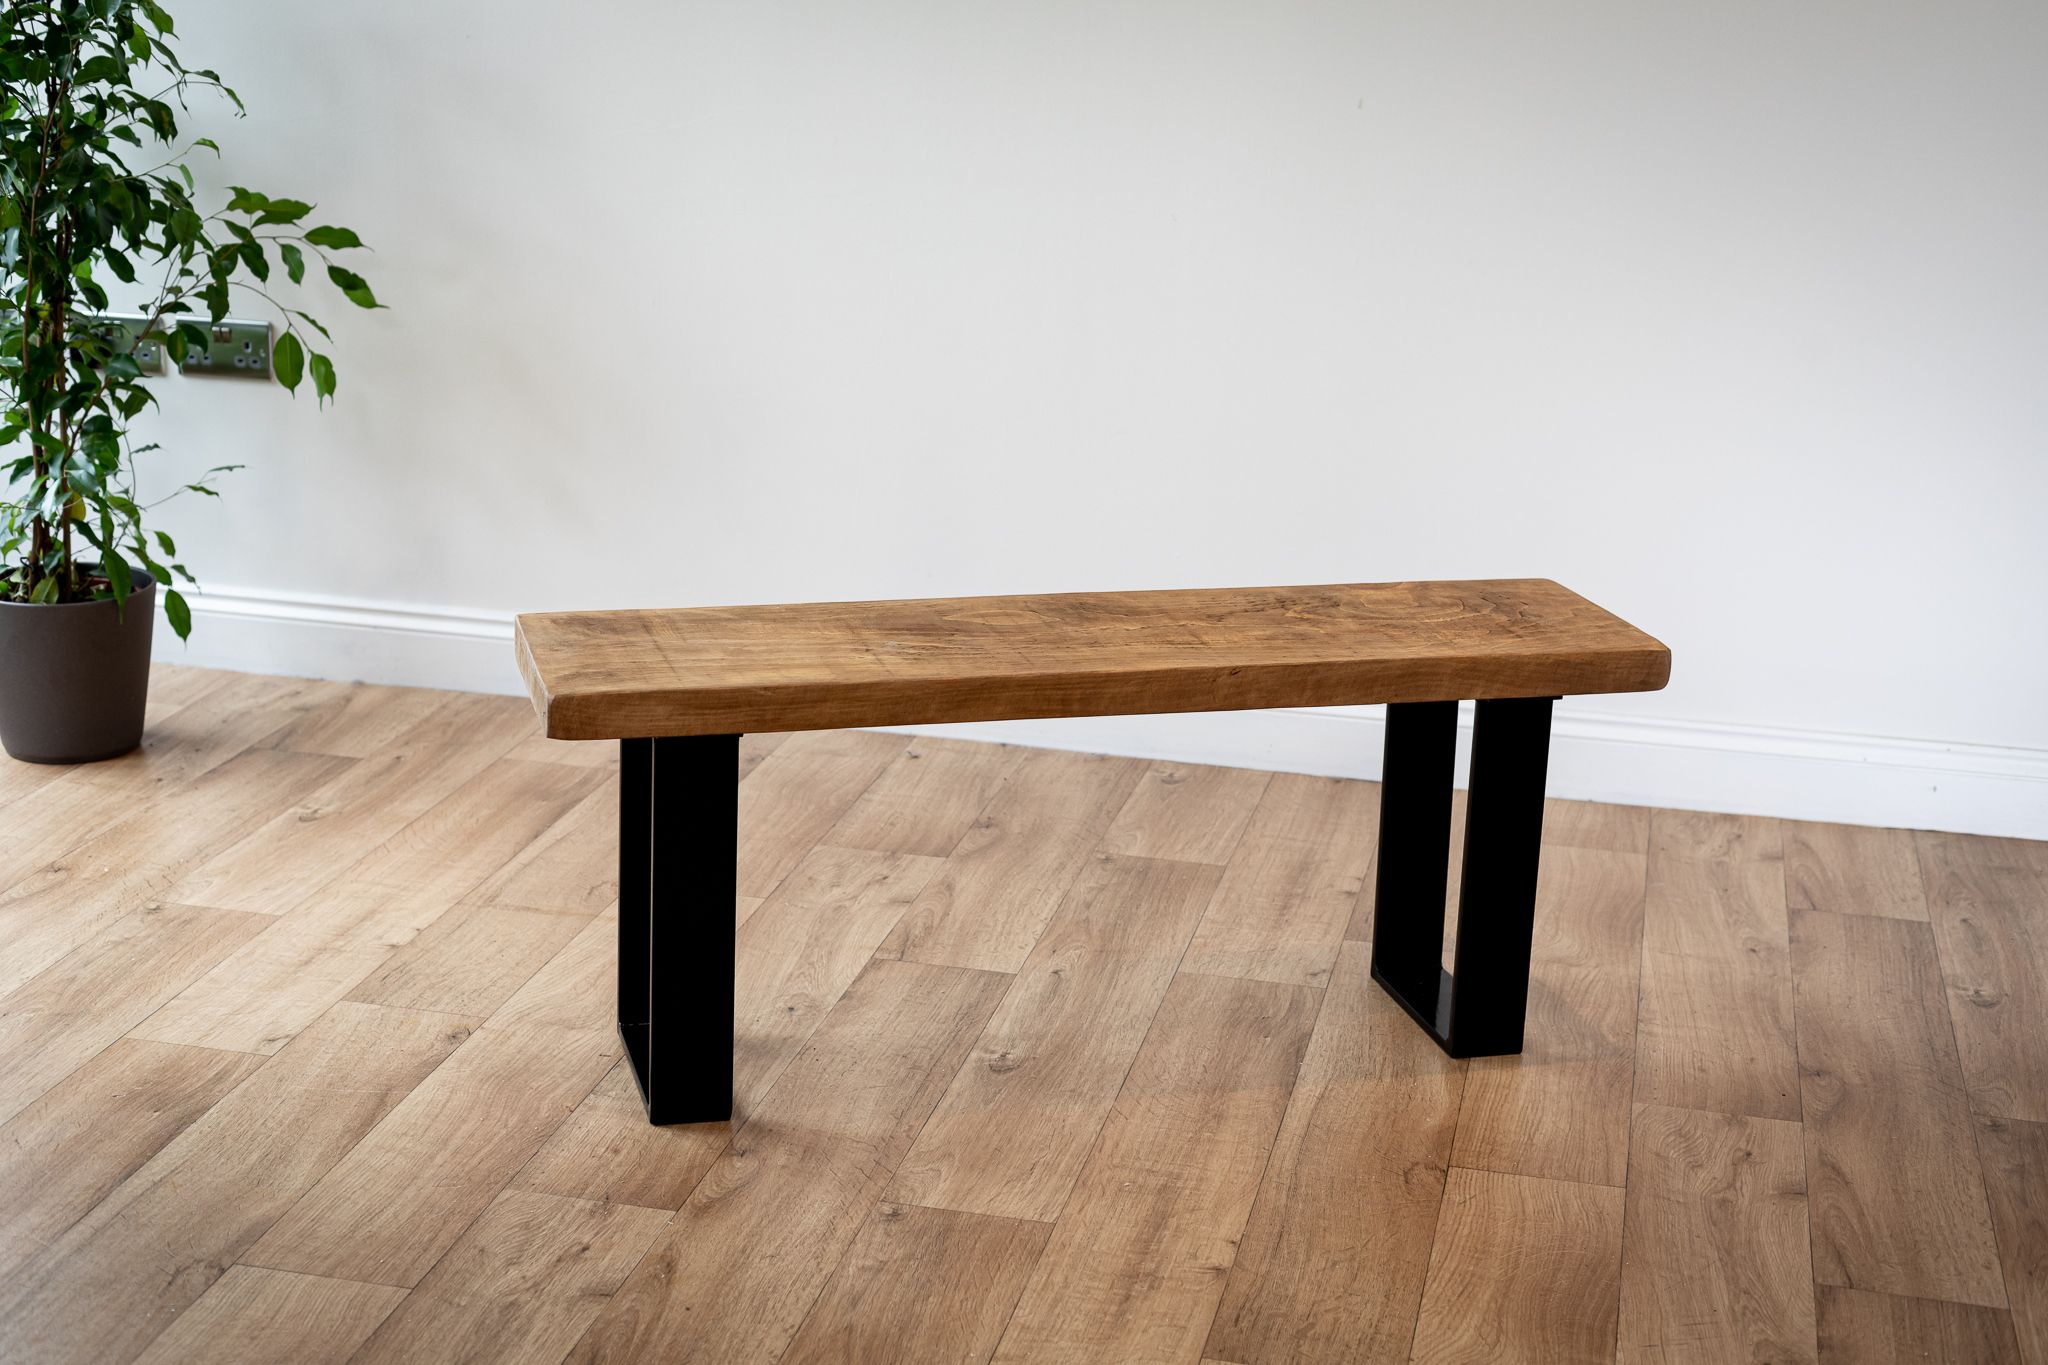 Most Up To Date Matte Black Metal Desks Throughout Rustic Wood Top Bench, With Black Metal Flat Bar Frame (View 13 of 15)